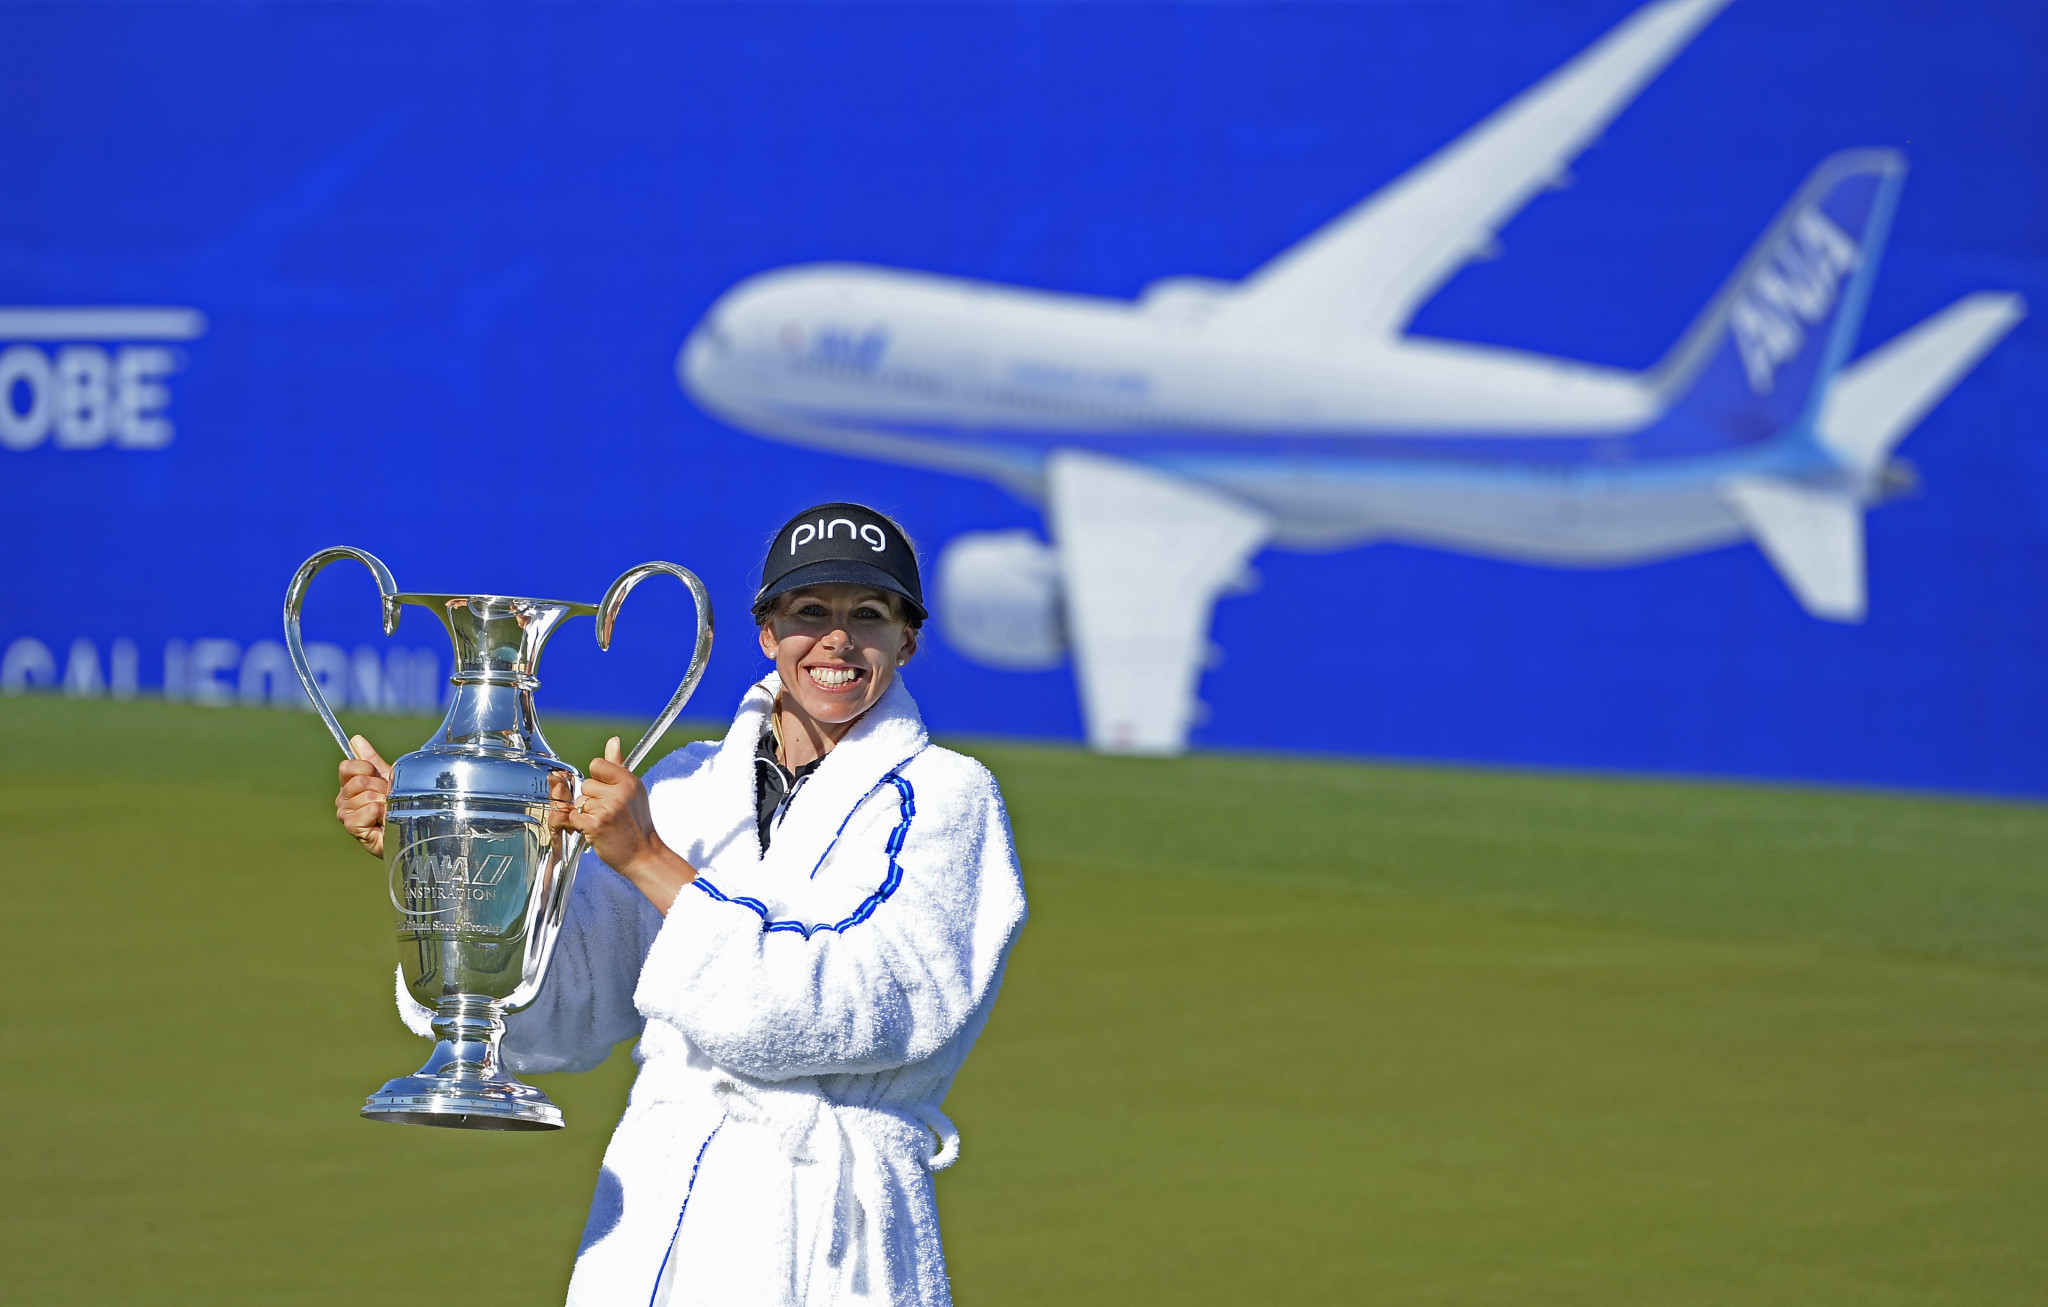 Sweden’s Pernilla Lindberg claimed her first major title after beating South Korea’s Inbee Park in a mammoth eight-hole play-off at the ANA Inspiration in California ©Getty Images